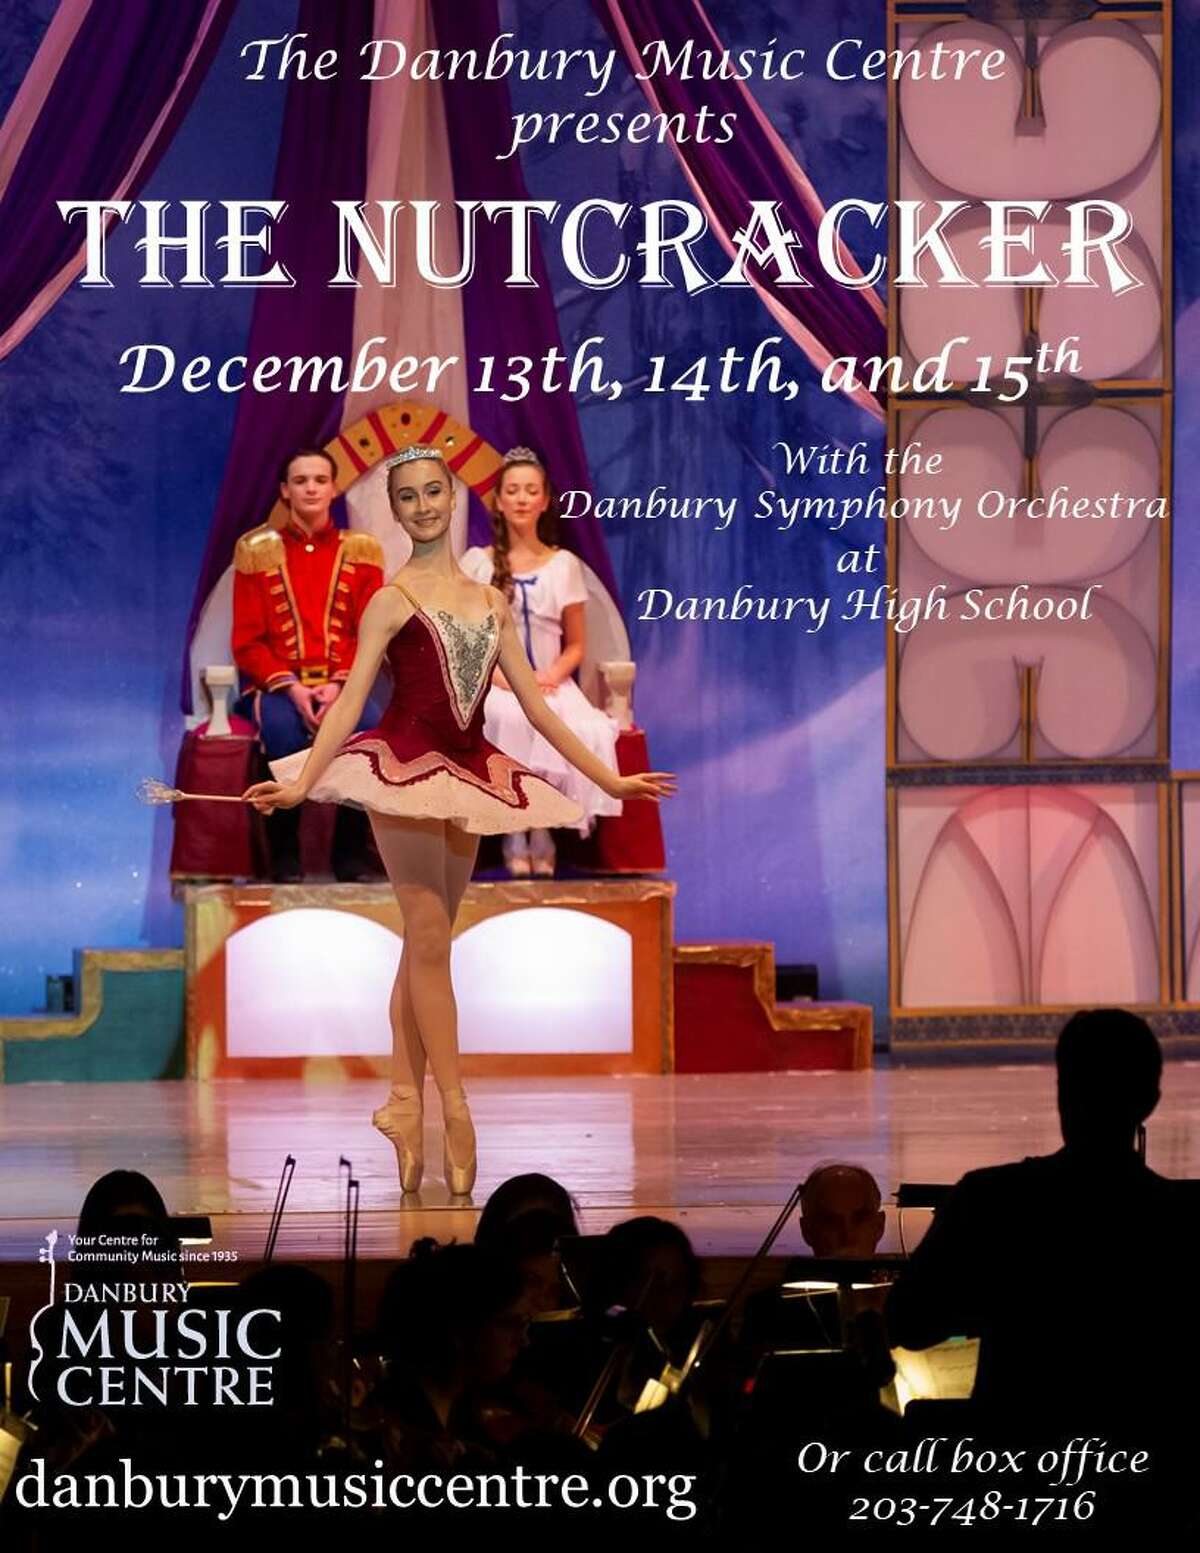 Danbury Music Centre’s 52nd production of “Nutcracker Ballet,” with three performances, is taking place December 13-15 in the Danbury High School auditorium.